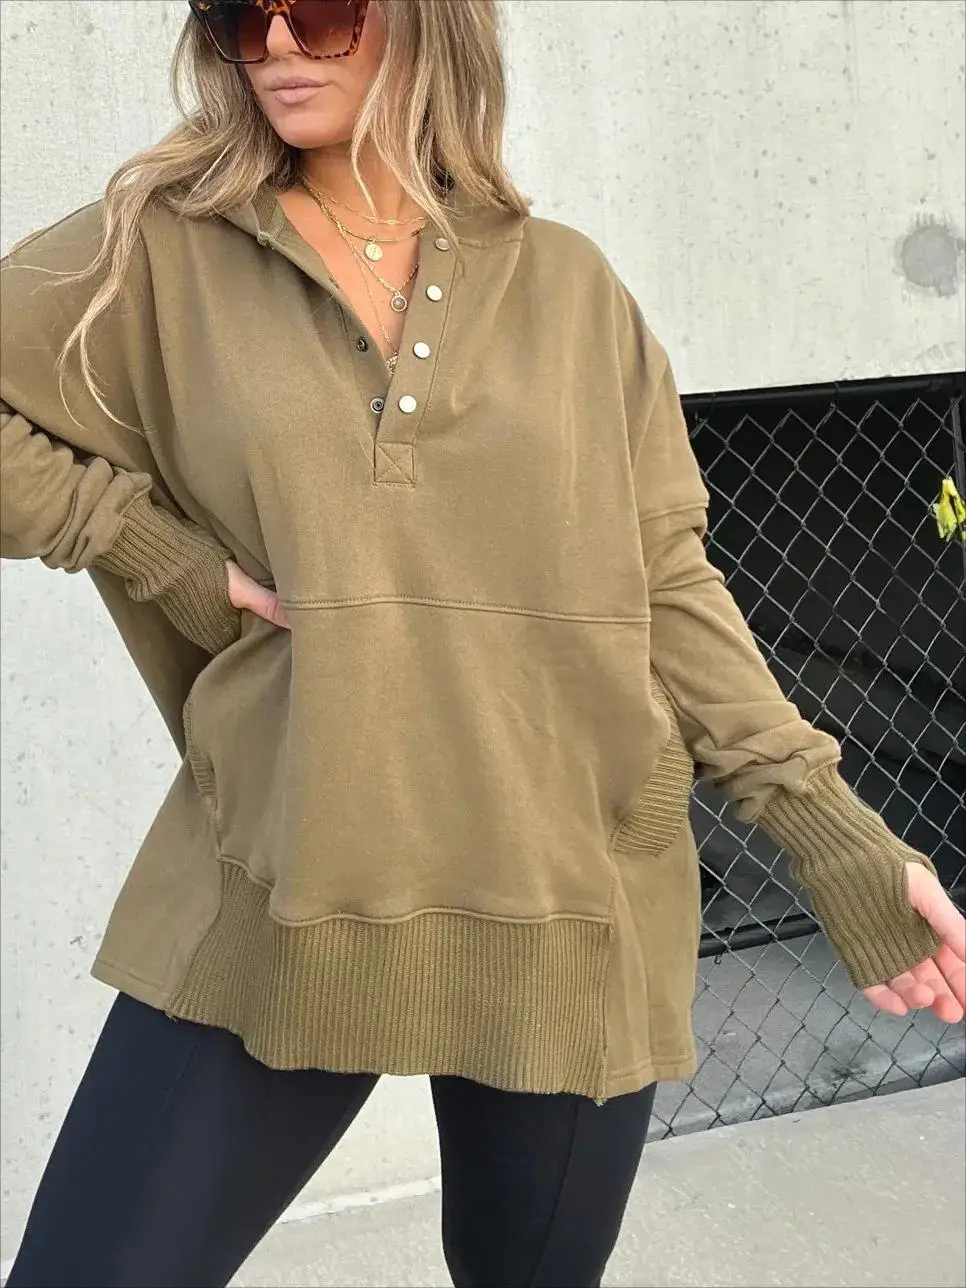 2023 Autumn and Winter New V-neck Hooded Bat-sleeve Sweatshirt Loose Casual Threaded Splicing Top for Women Толстовка